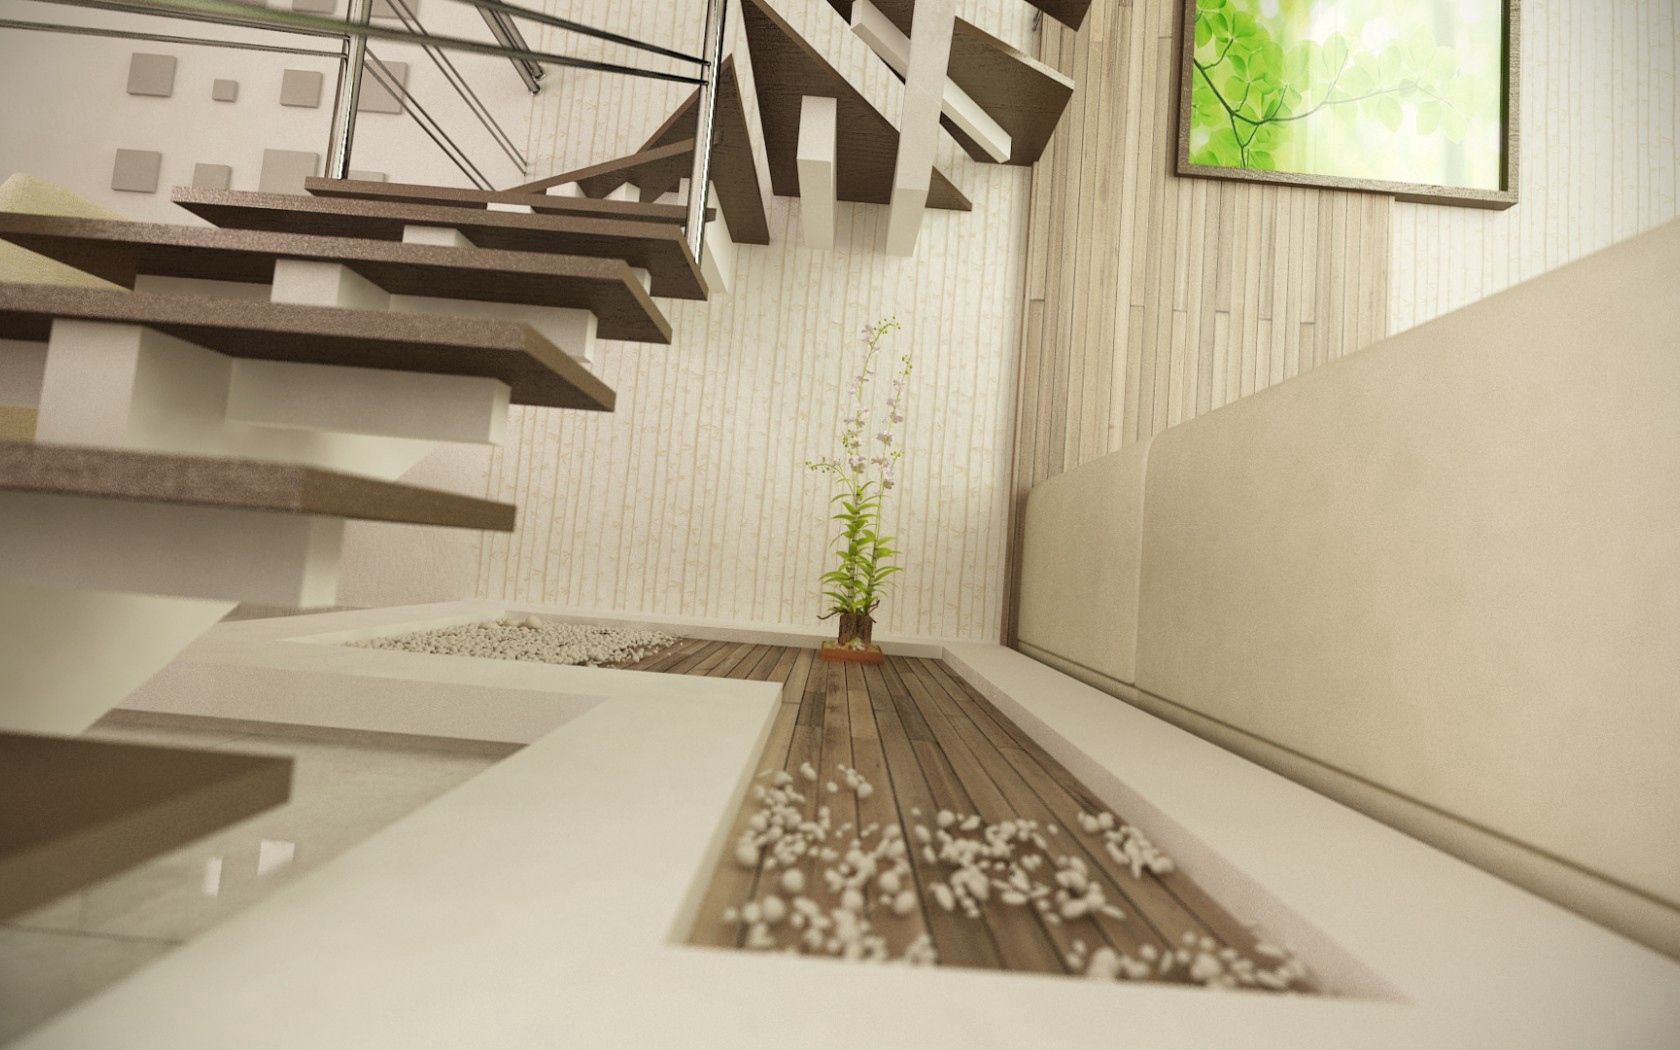 art, plant, miscellanea, miscellaneous, ladder, stairs, room, decor, steps, render